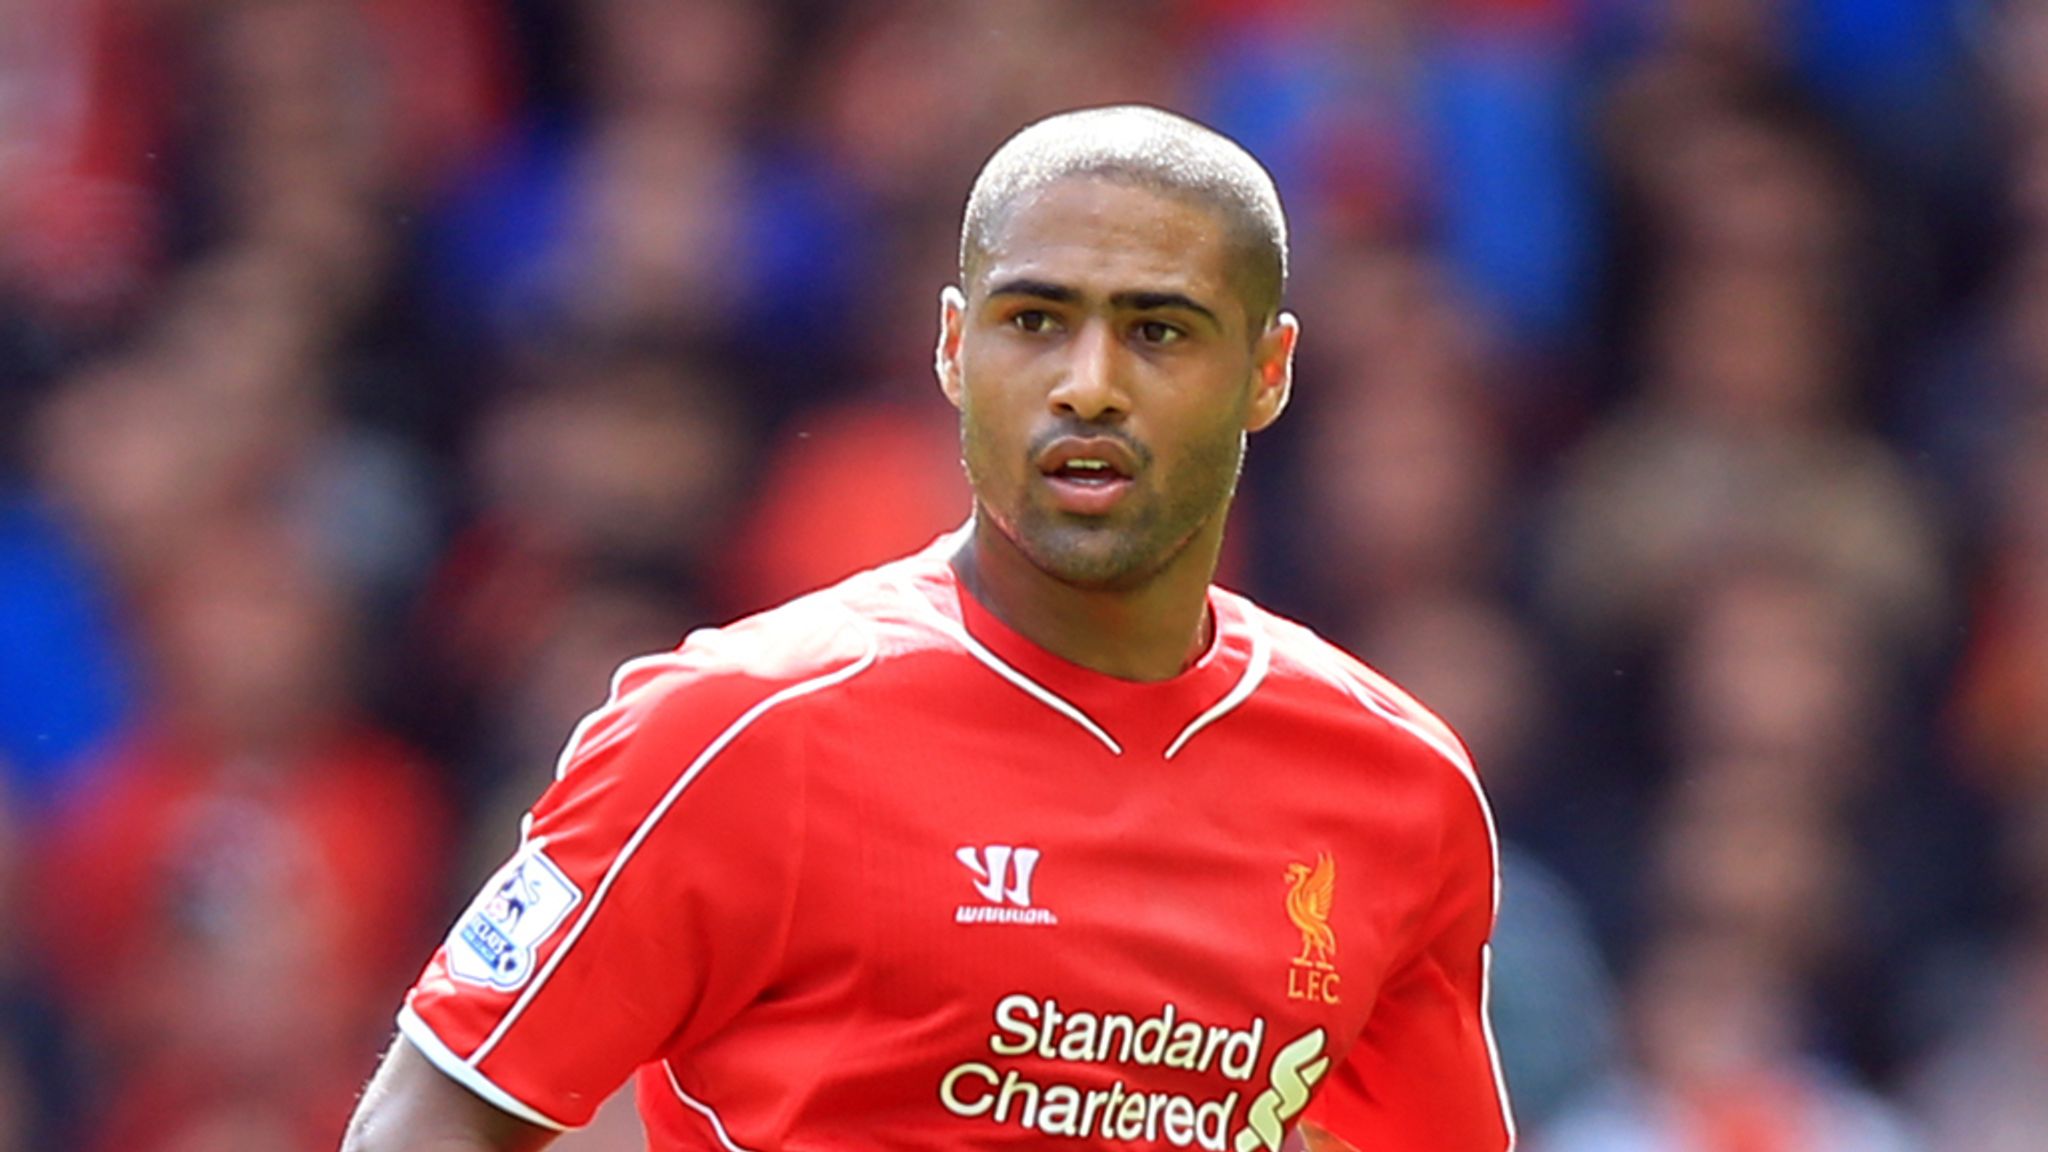 Glen Johnson believes incoming Liverpool boss Arne Slot has to win over the dressing room ASAP.